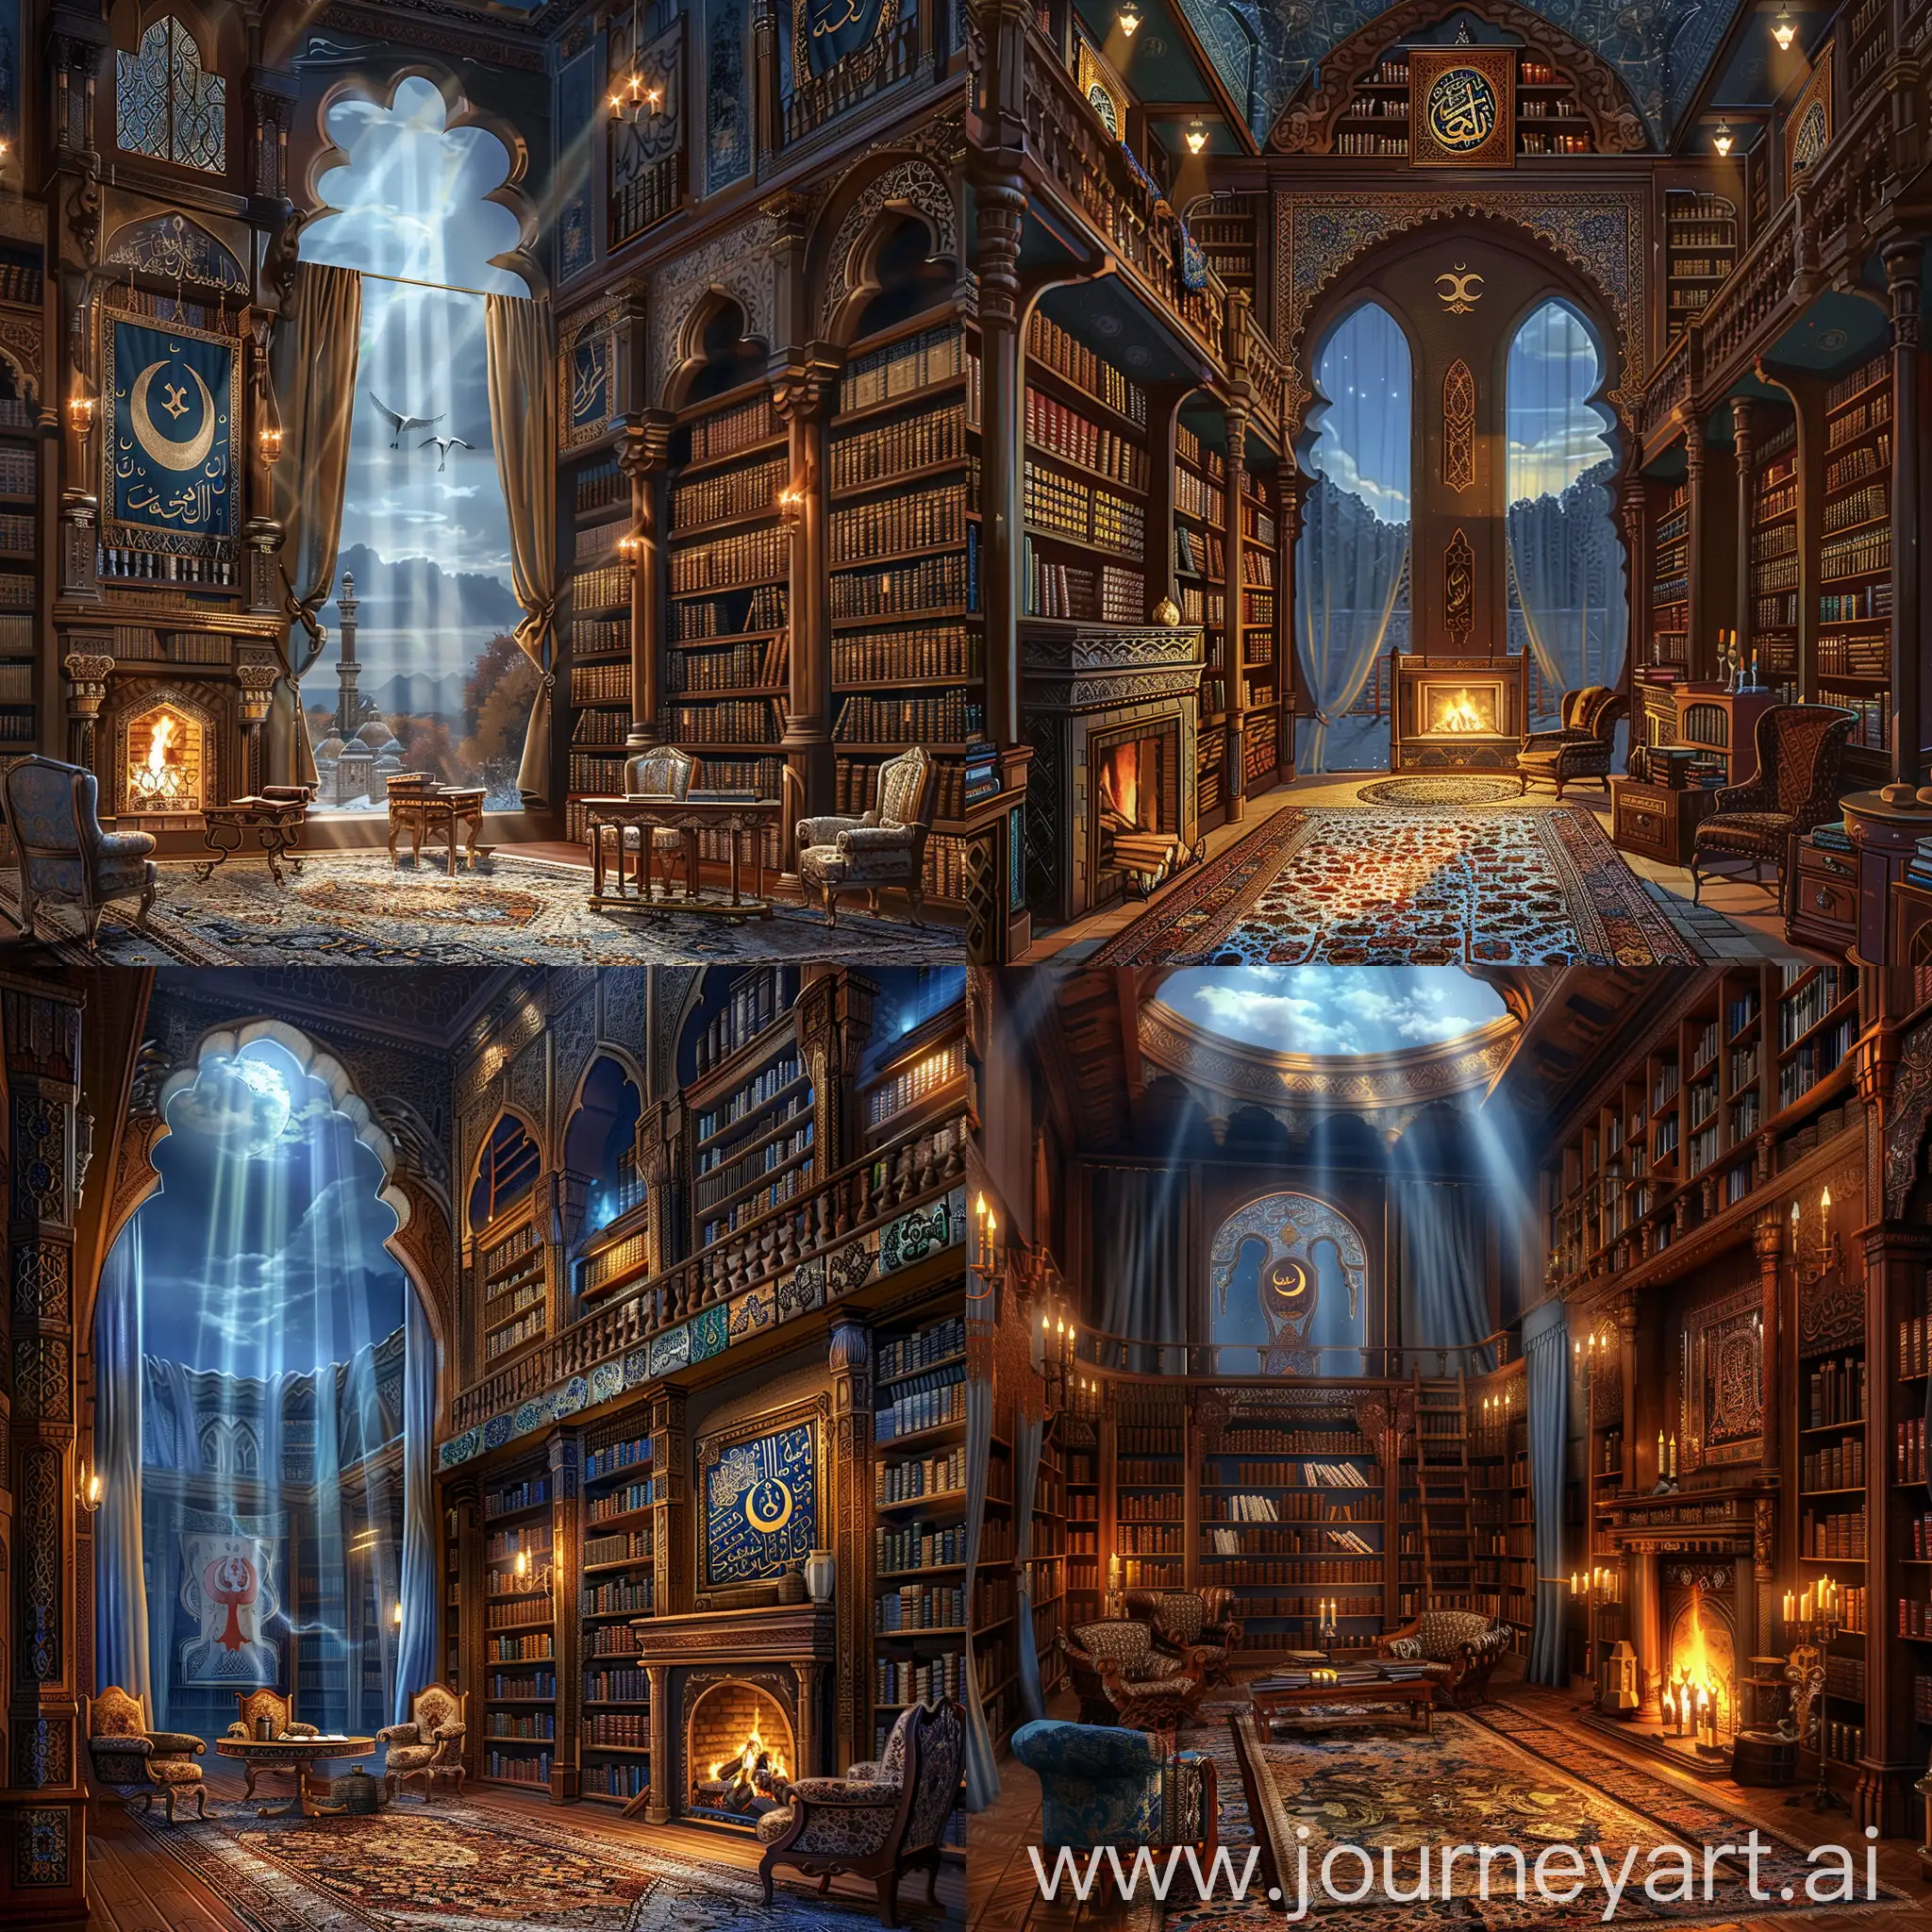 Magical-Medieval-Islamic-Library-Tranquil-Scholarly-Atmosphere